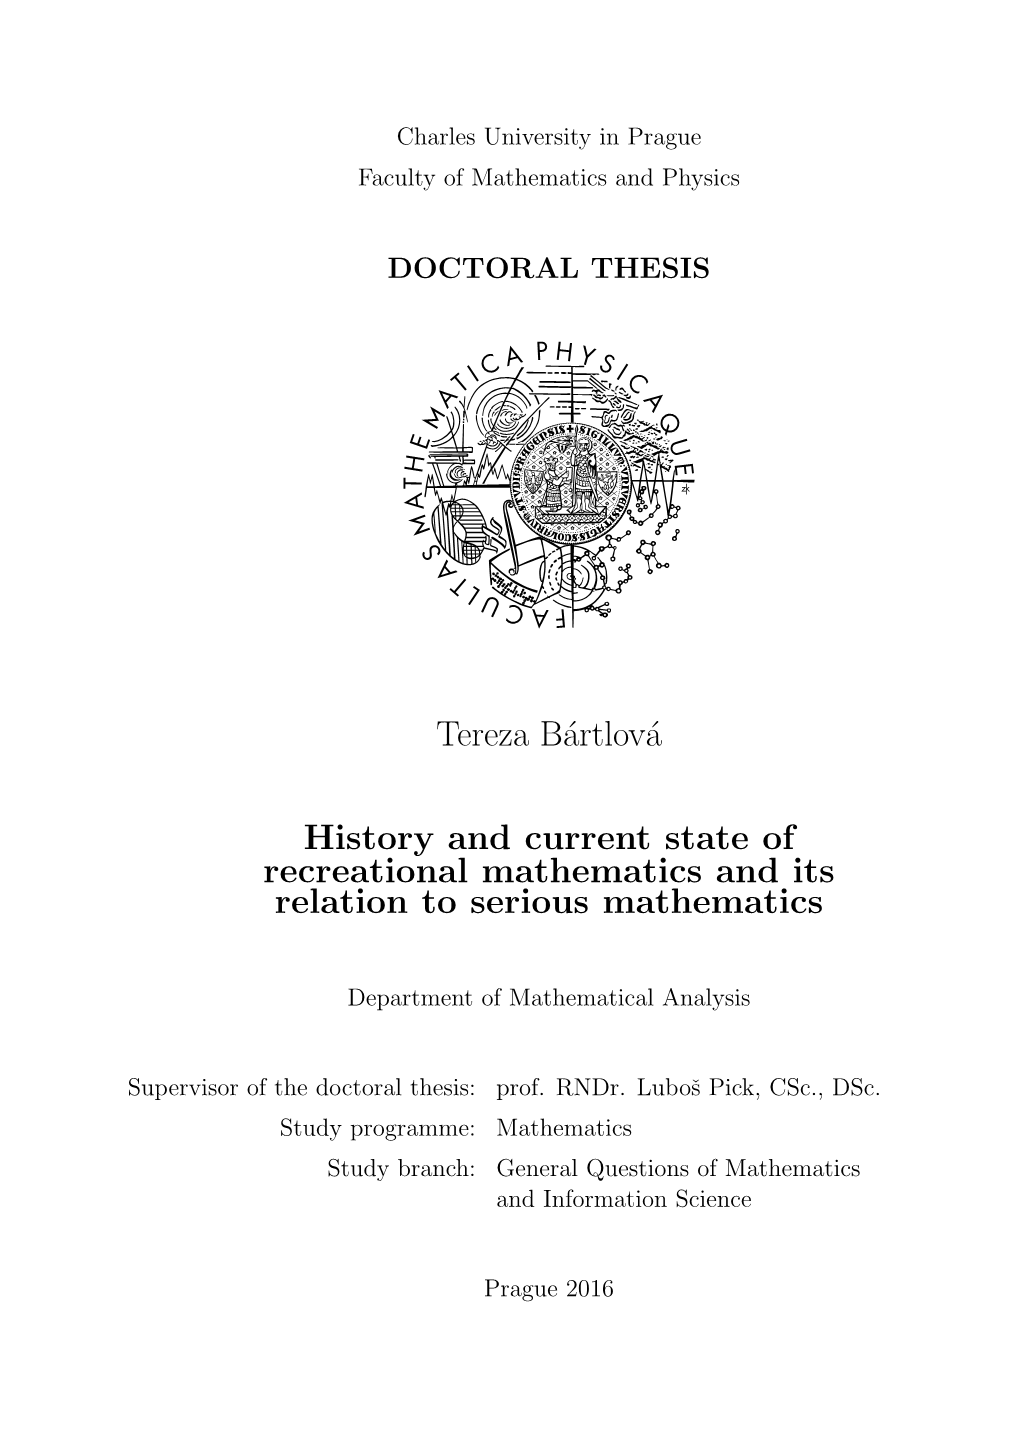 History and Current State of Recreational Mathematics and Its Relation to Serious Mathematics